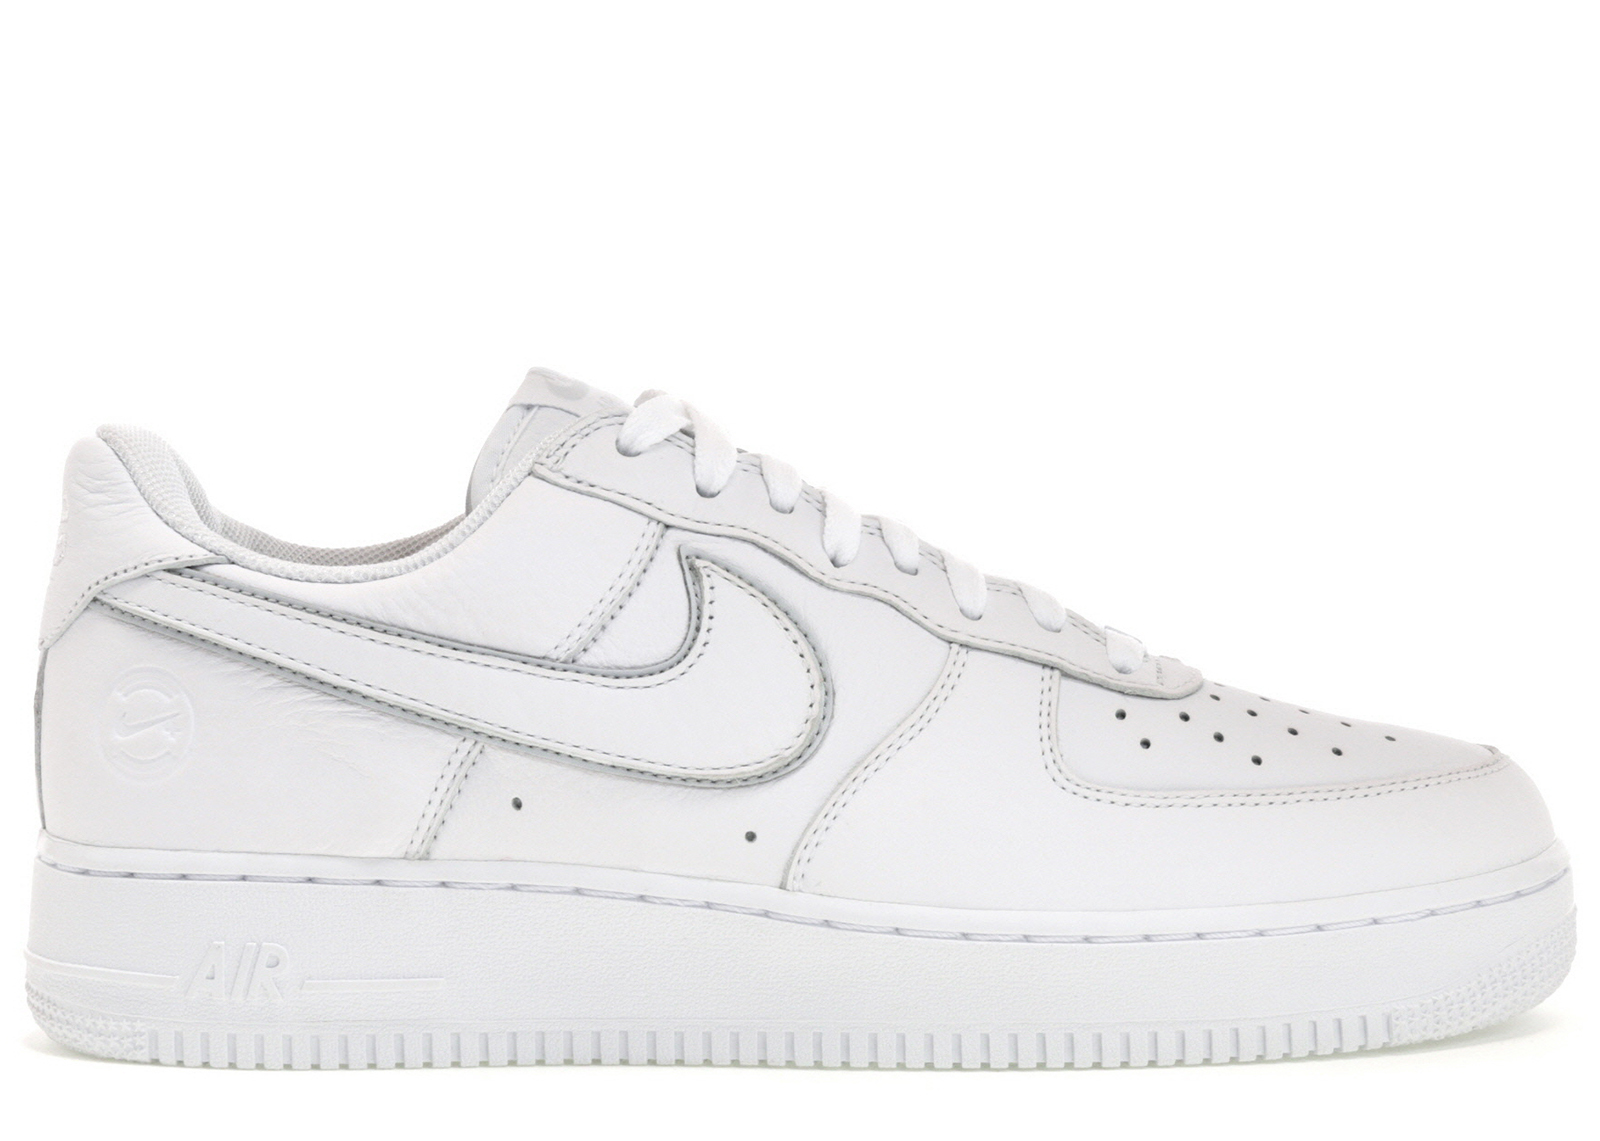 Nike Air Force 1 Low NikeConnect NYC Men's - AO2457-100 - US